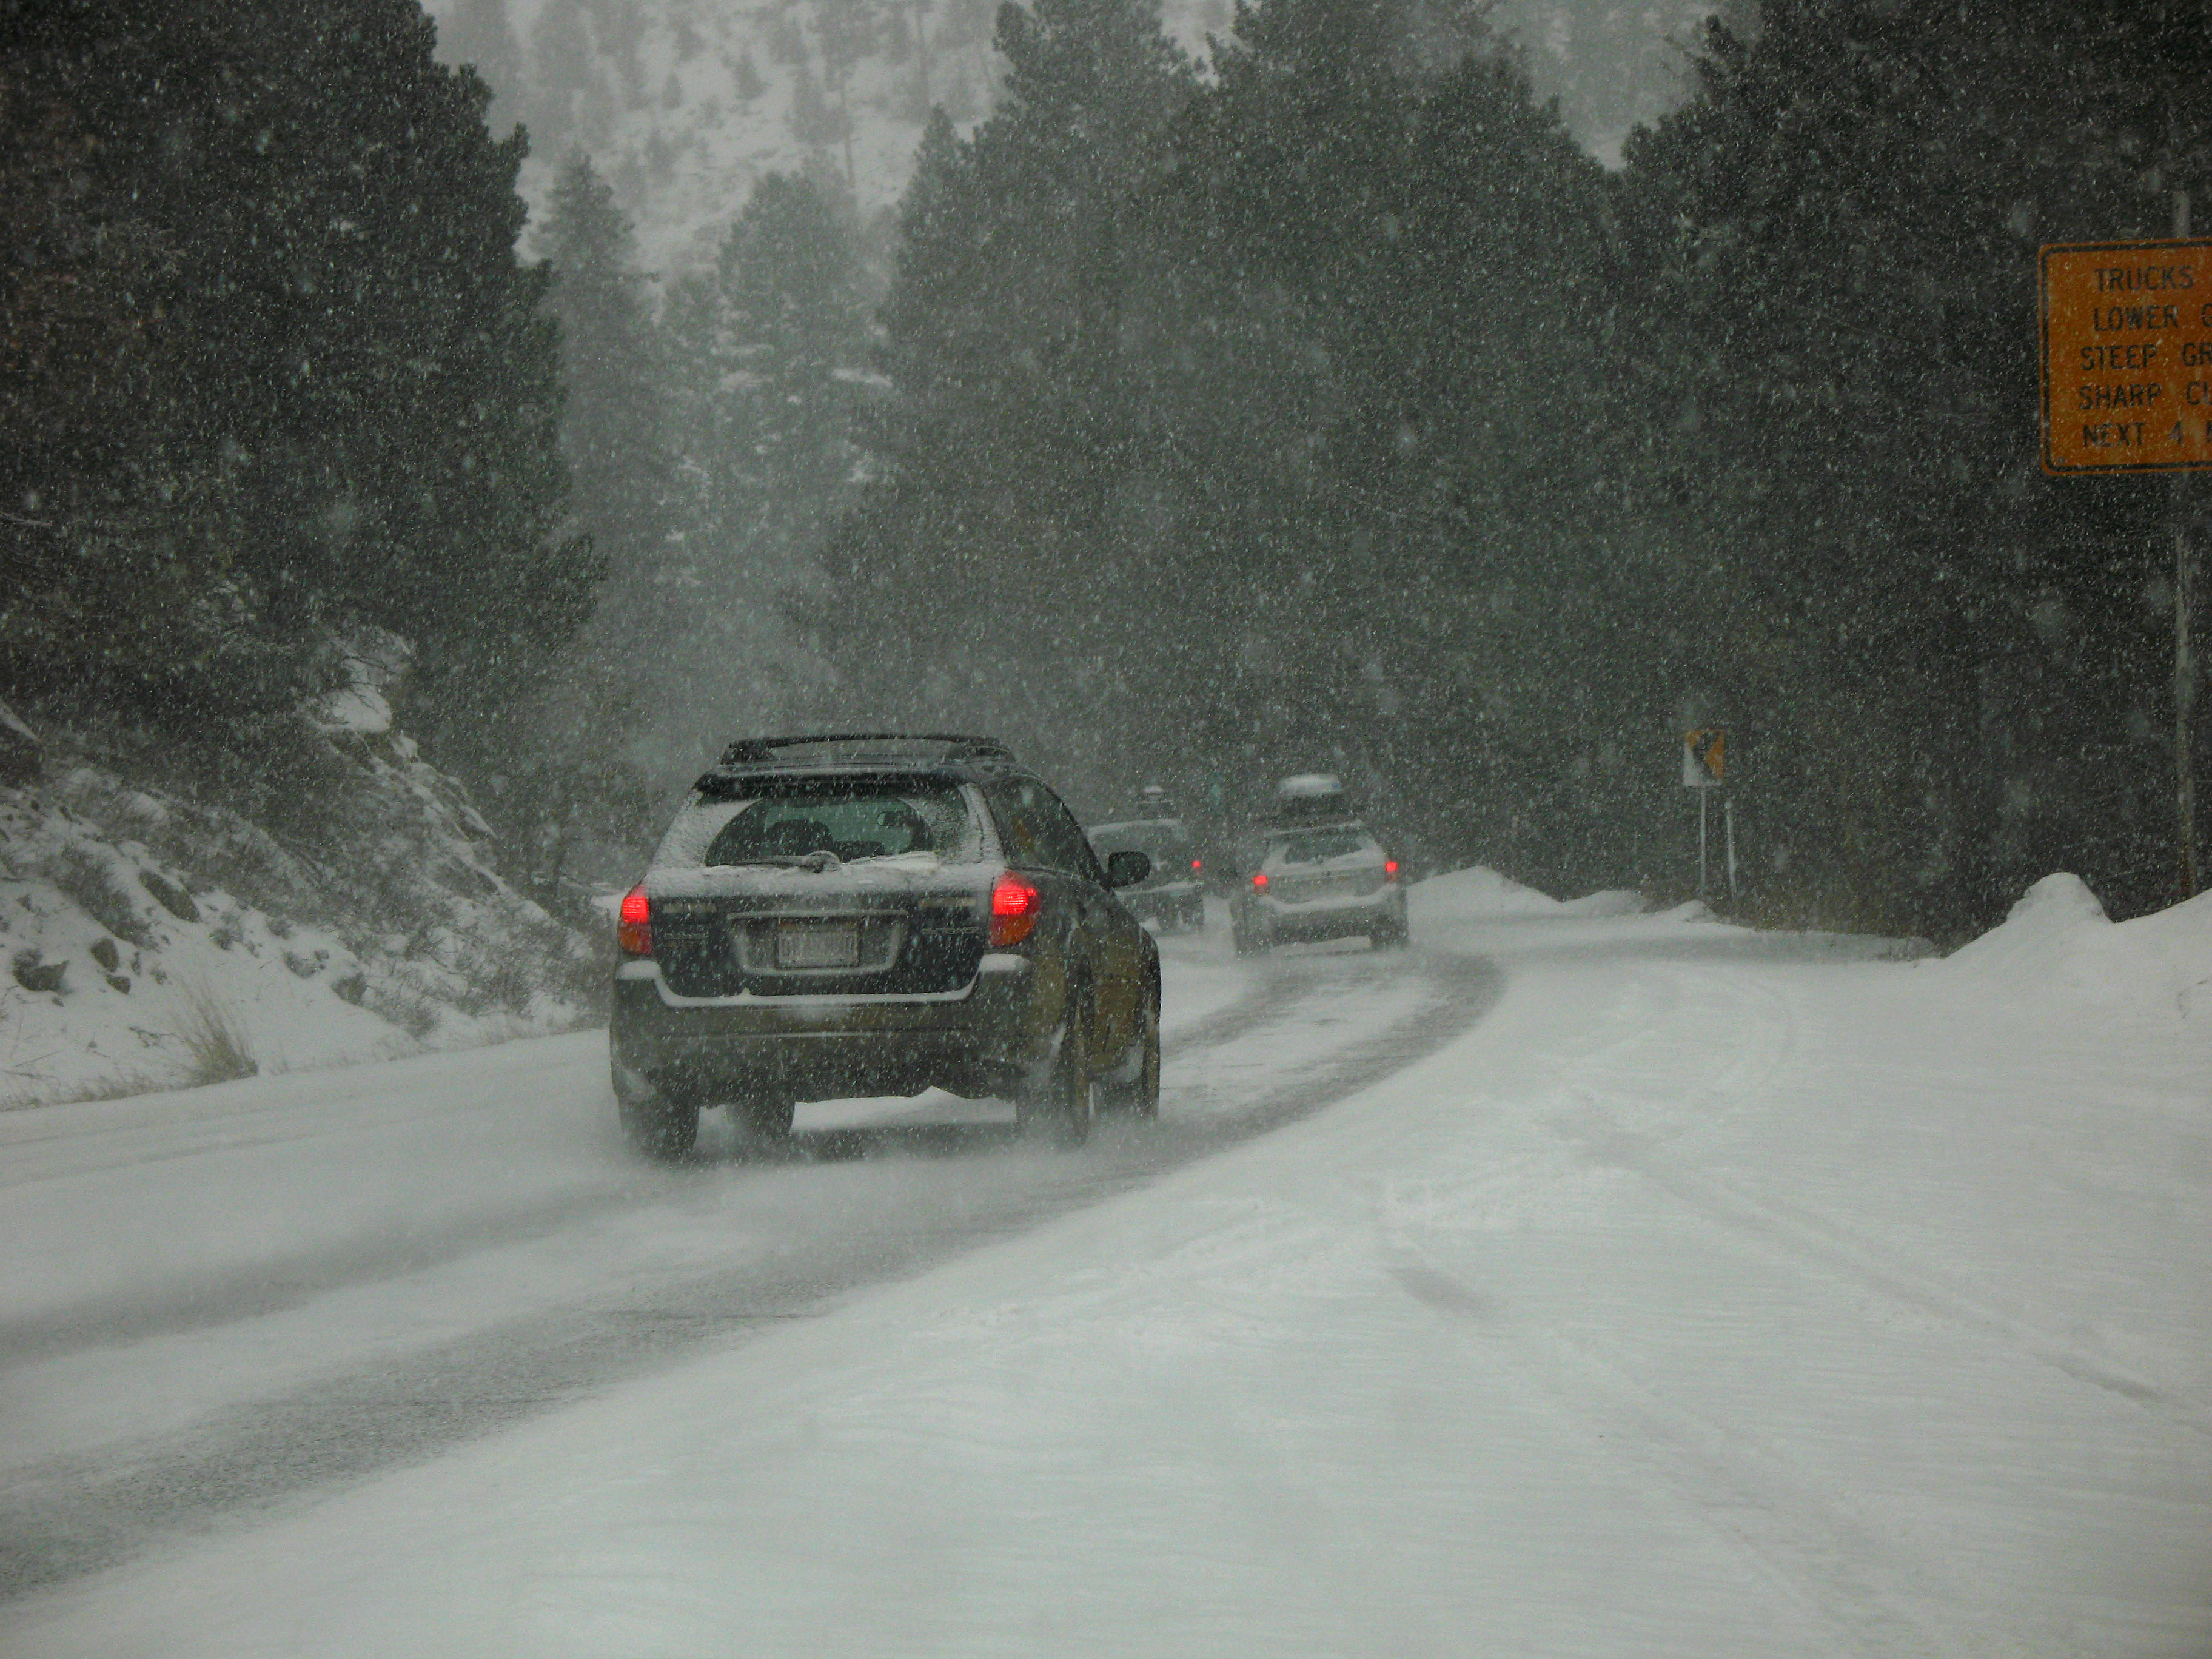 Cars driving in snowy conditions